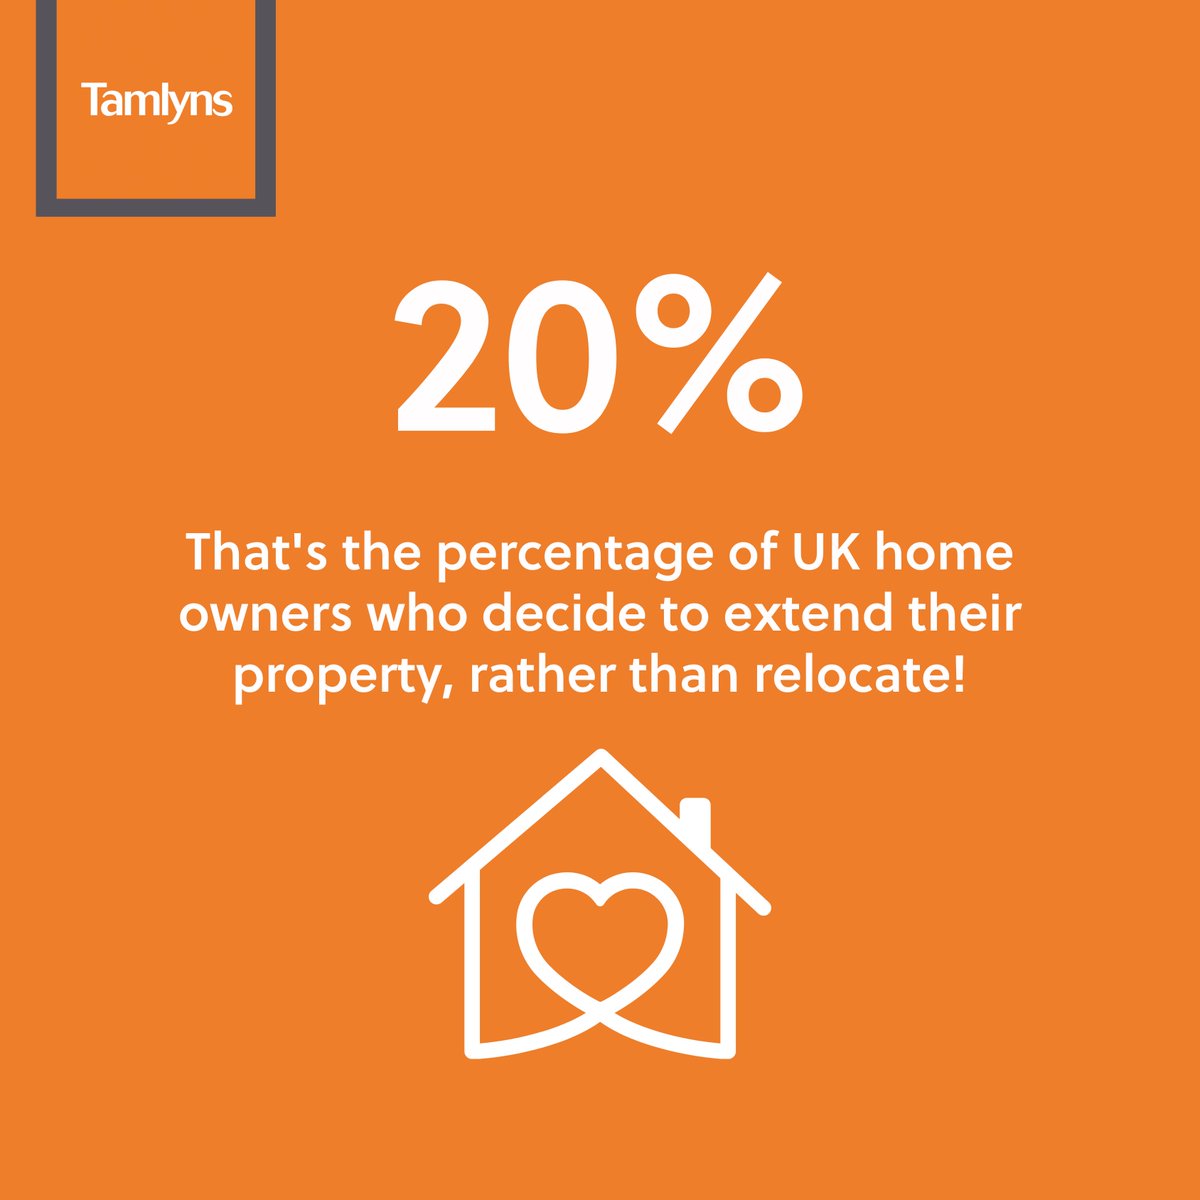 A recent study found that as many as 20% of people would rather extend their property than relocate. Consider Tamlyns to assist in the development of your property, with our range of architectural and residential services! #property #propertymarket #extension #extend #building